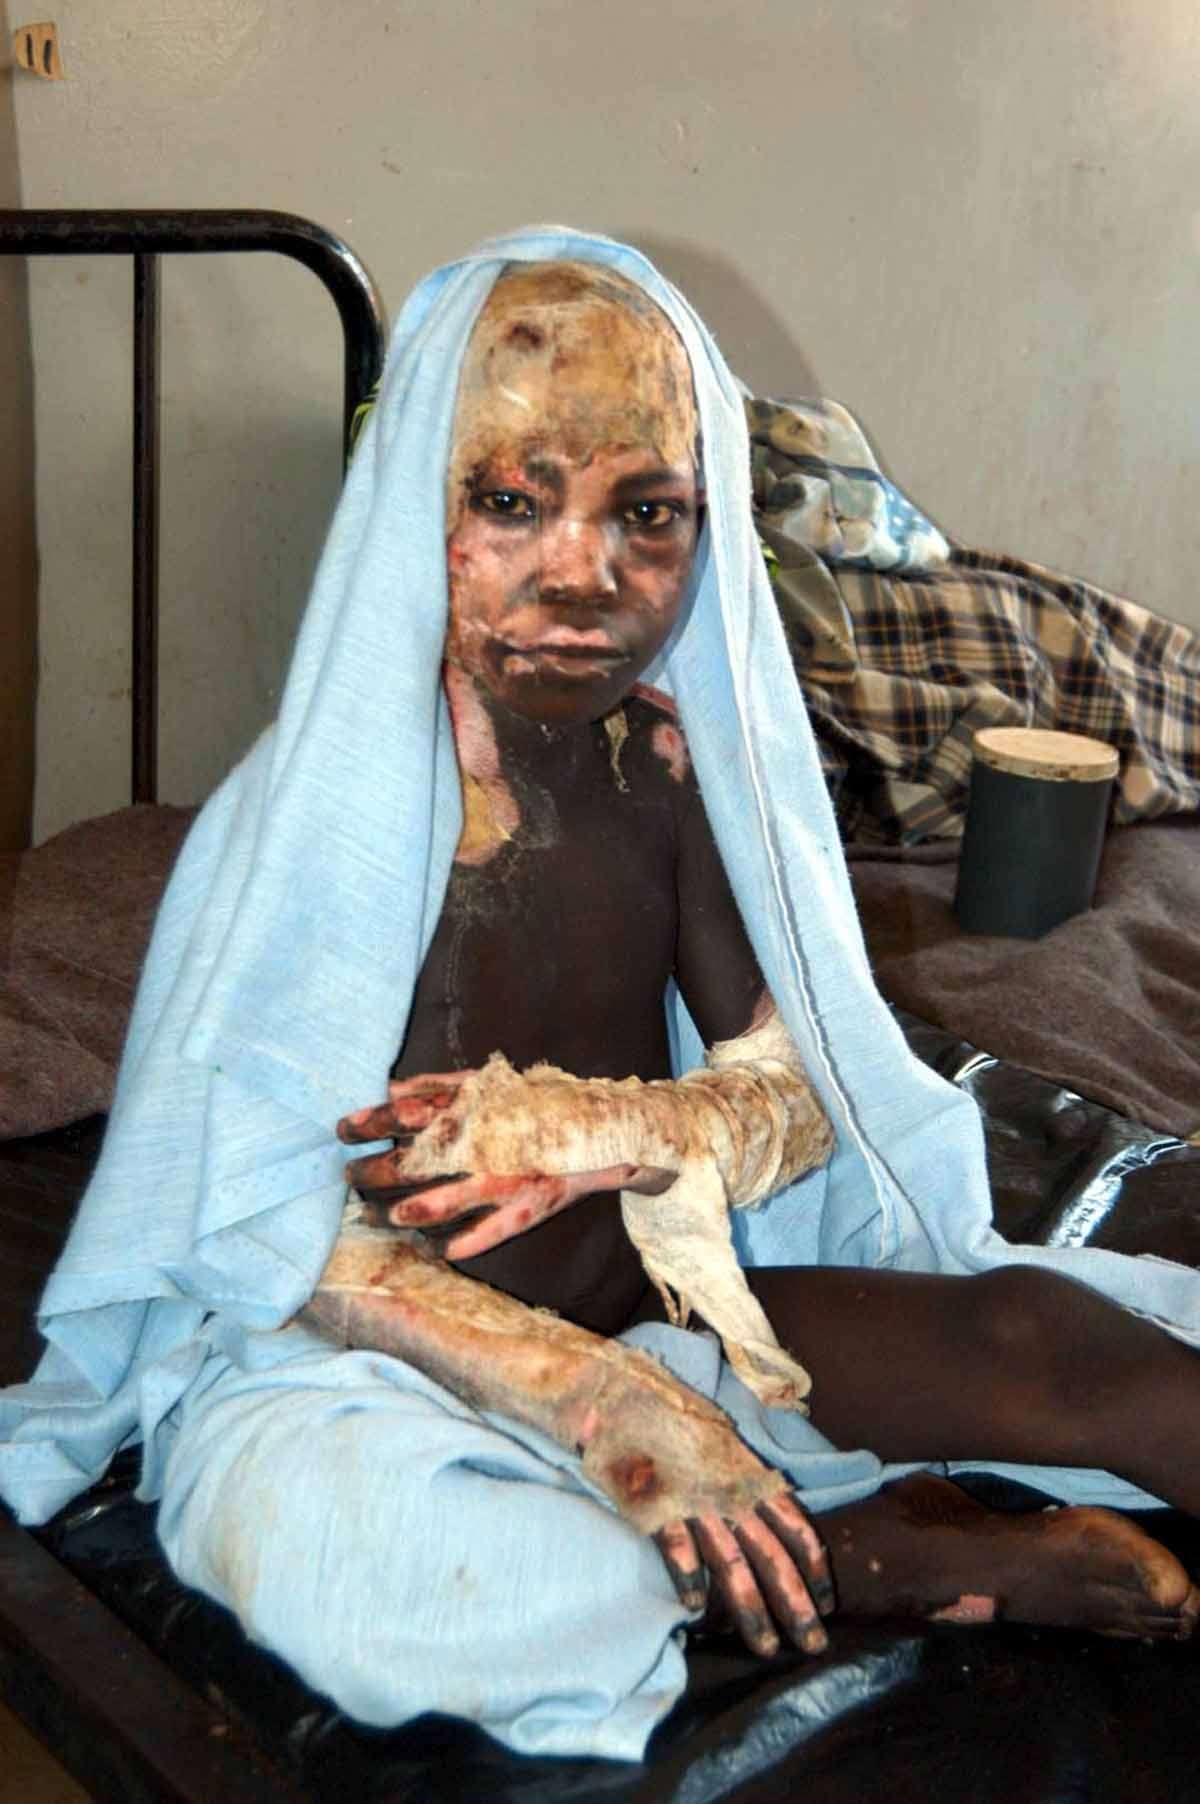 A victim of the Lord's Resistance Army (LRA) rebel 21 February 2004 attack sits 23 February 2004 at one of the Internally Displaced Camp hospital in the northern Lira district. 